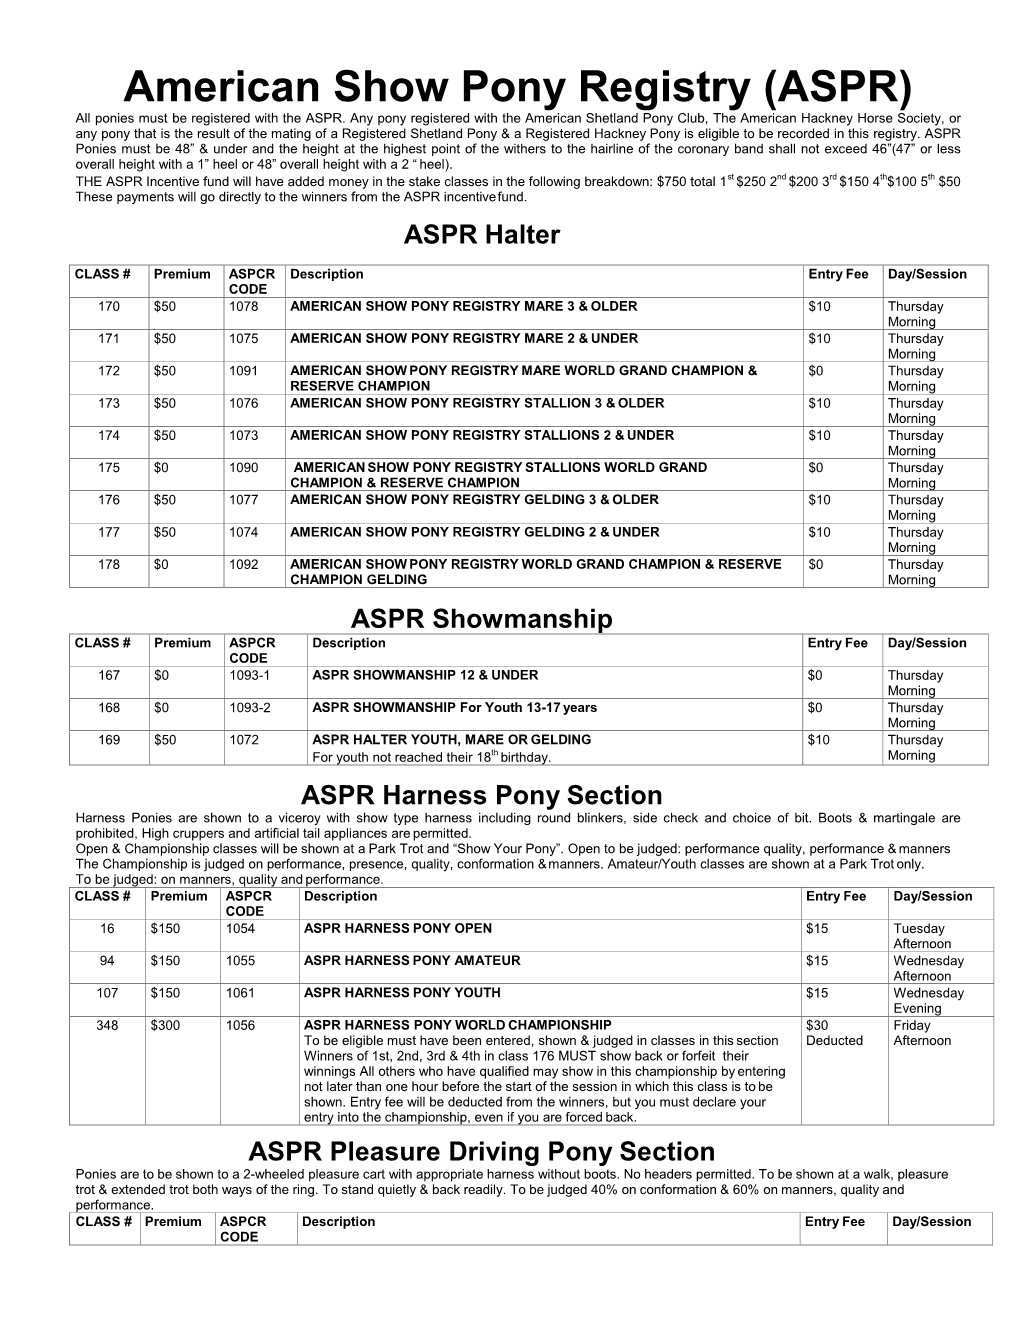 American Show Pony Registry (ASPR) All Ponies Must Be Registered with the ASPR